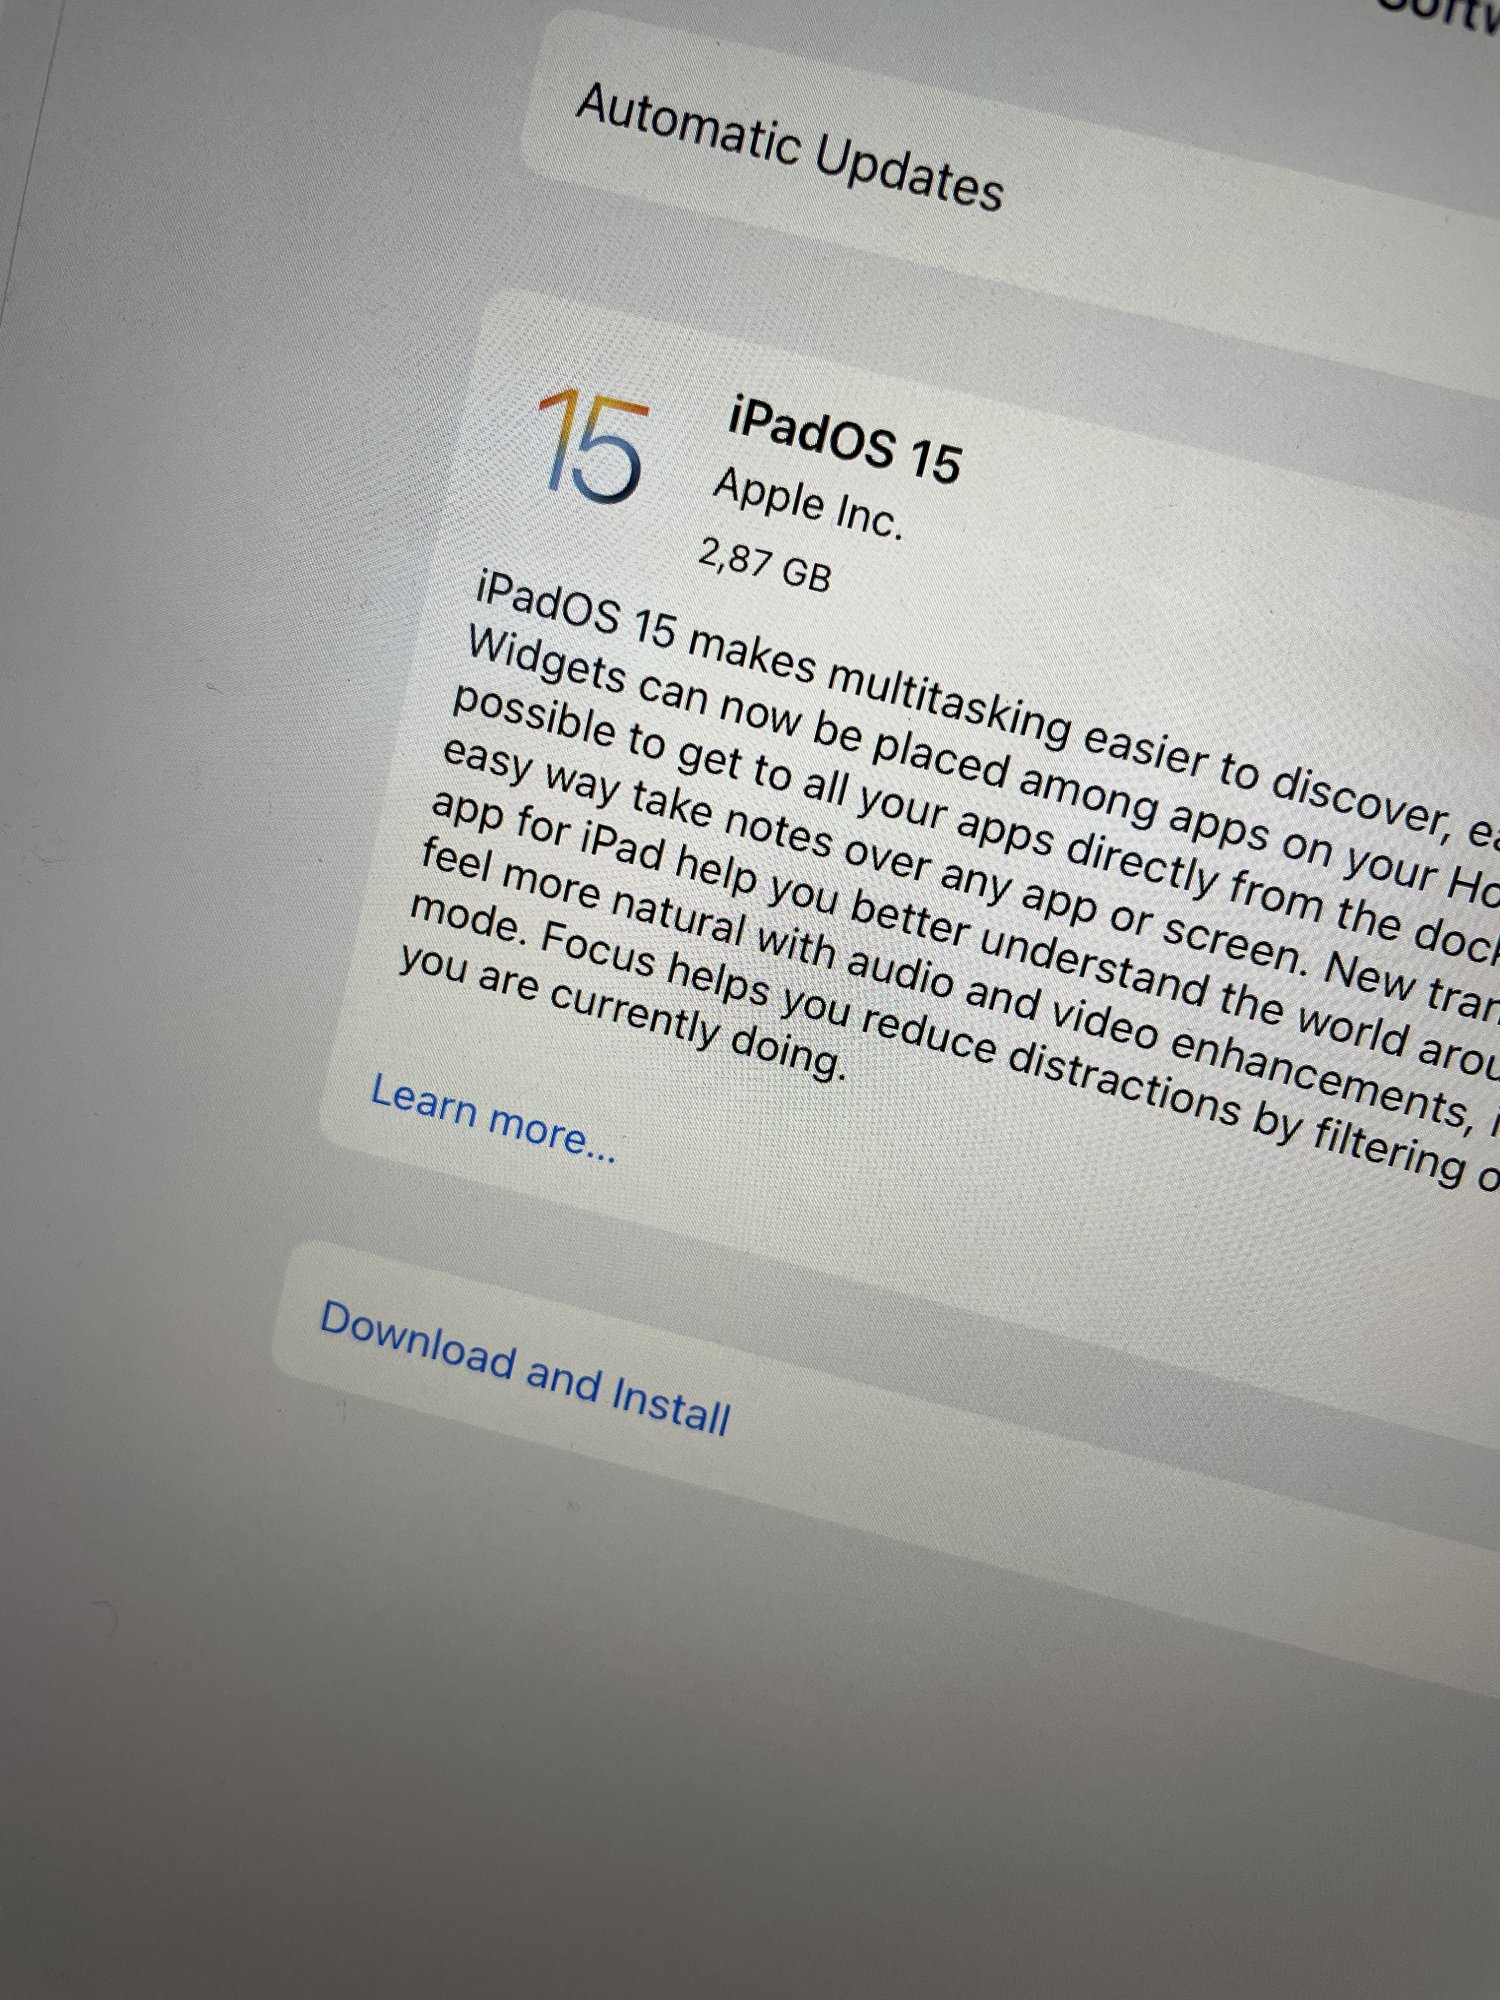 Here's When You Can Download iOS 15 and iPadOS 15 [Now Available] | Page 9  | MacRumors Forums